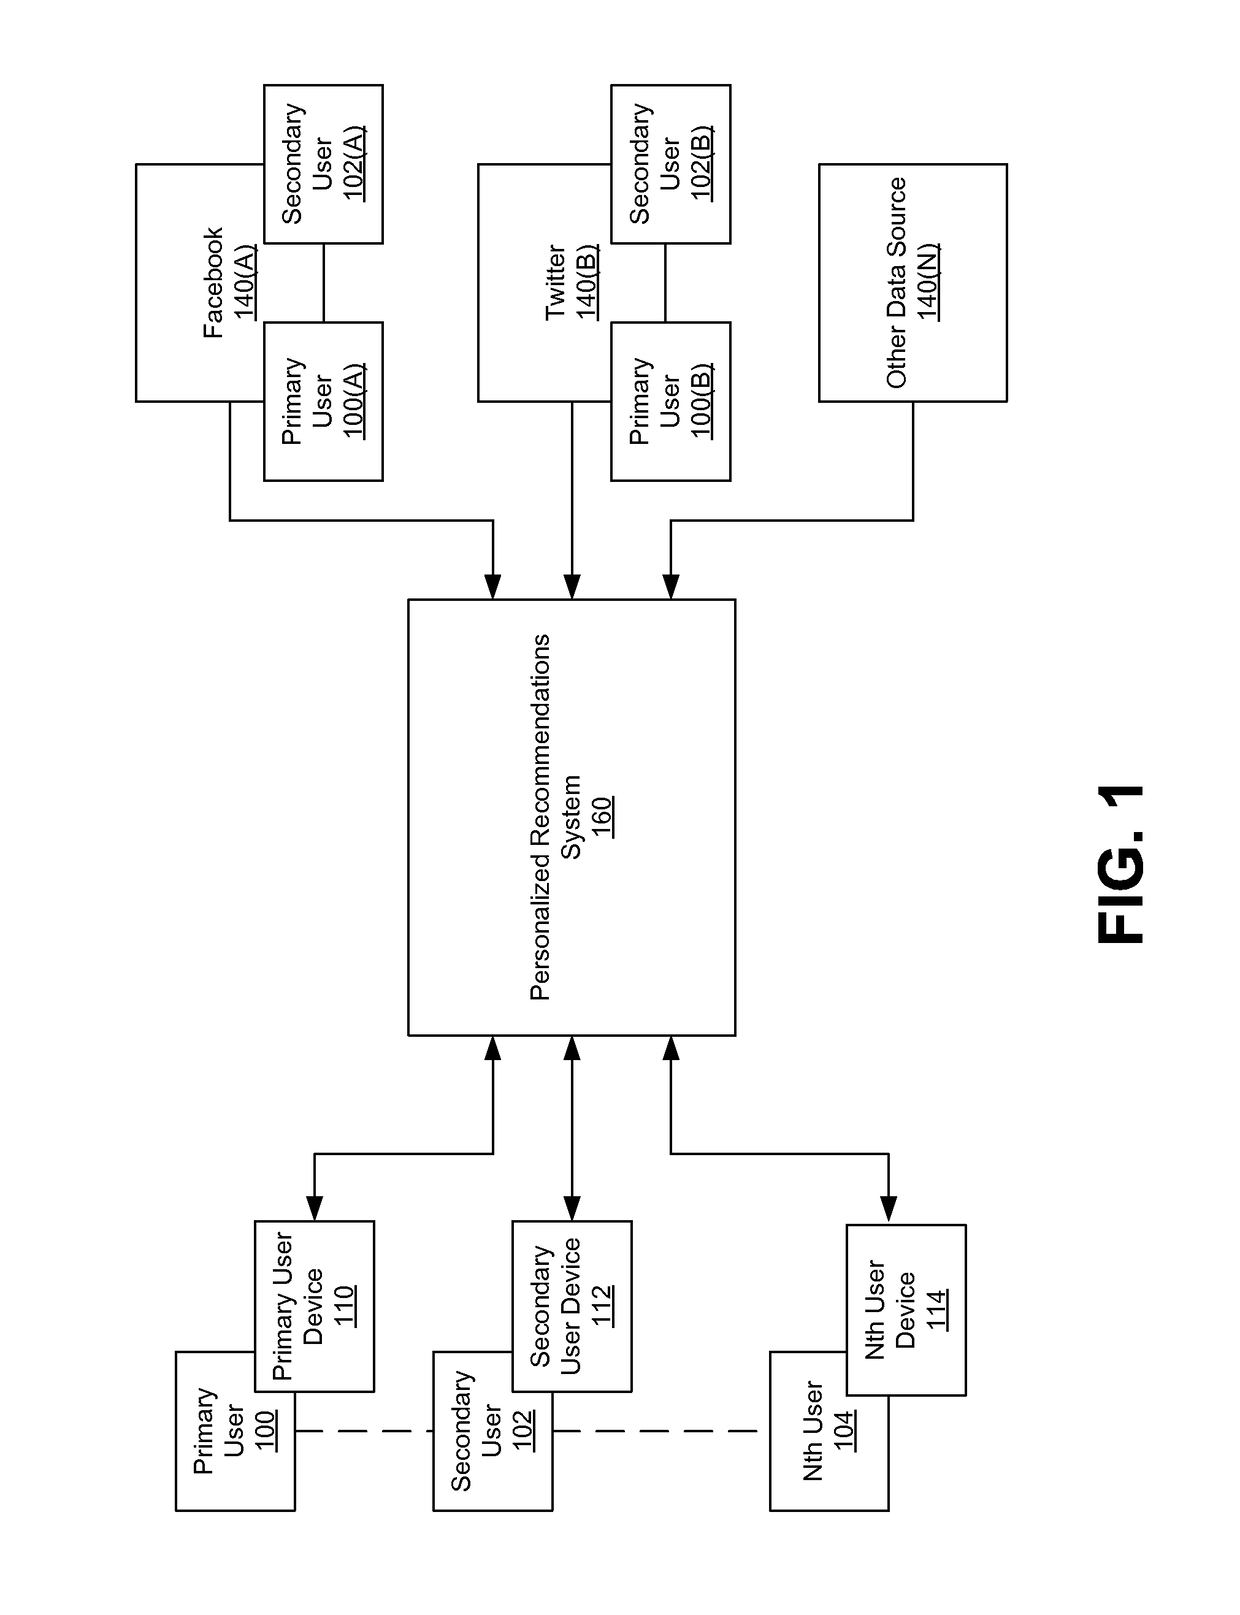 Computer system and method for analyzing data sets and generating personalized ecommendations